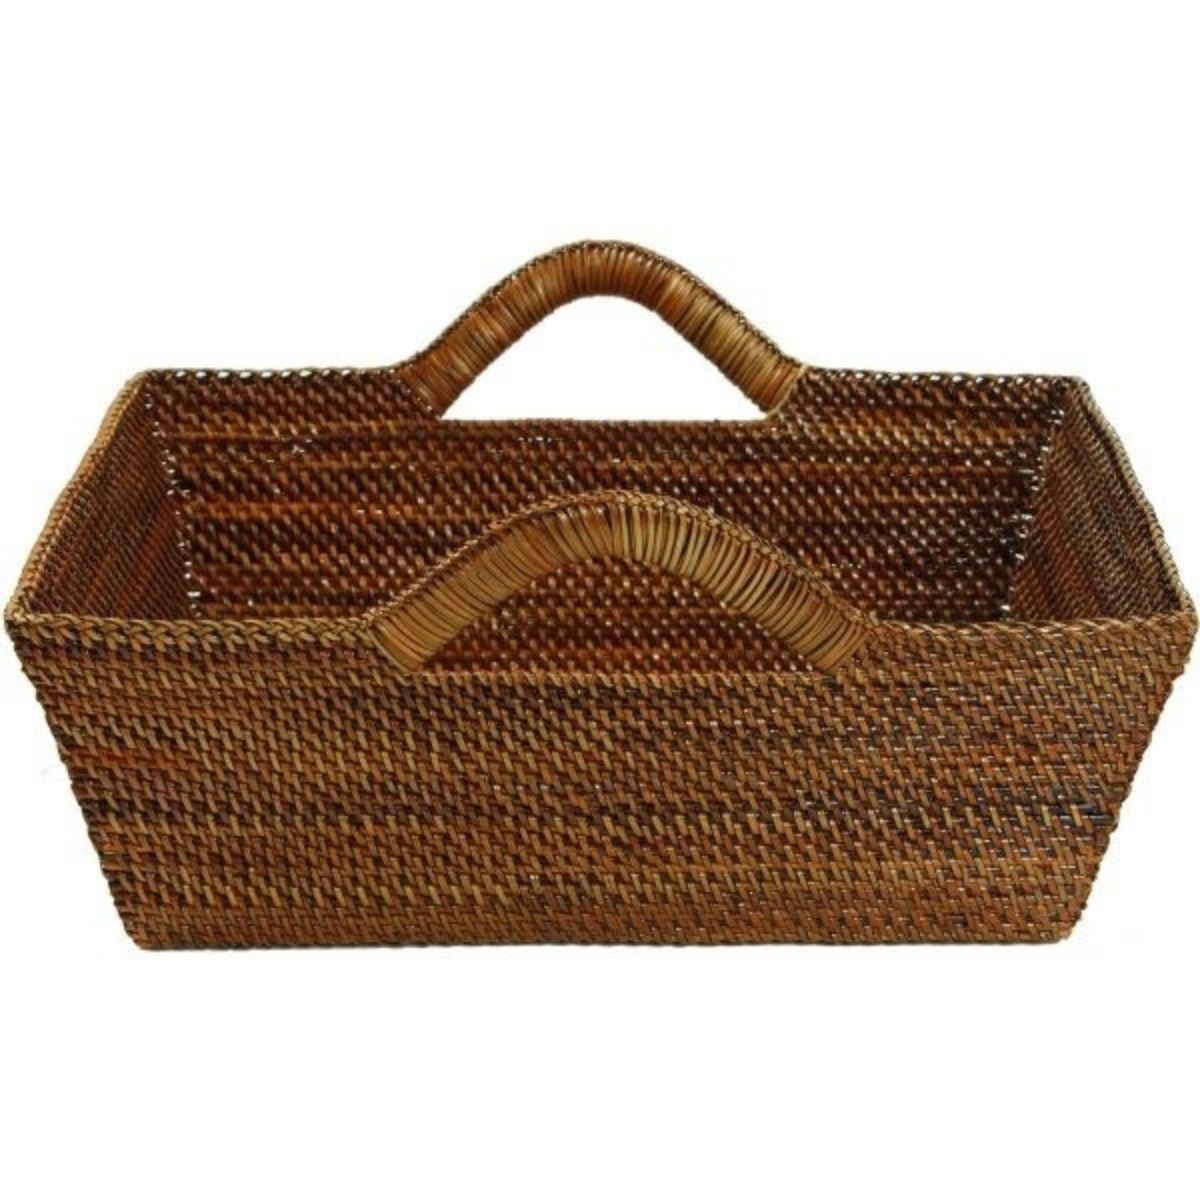 Woven Vine Rectangular Tote with Wrapped Handles